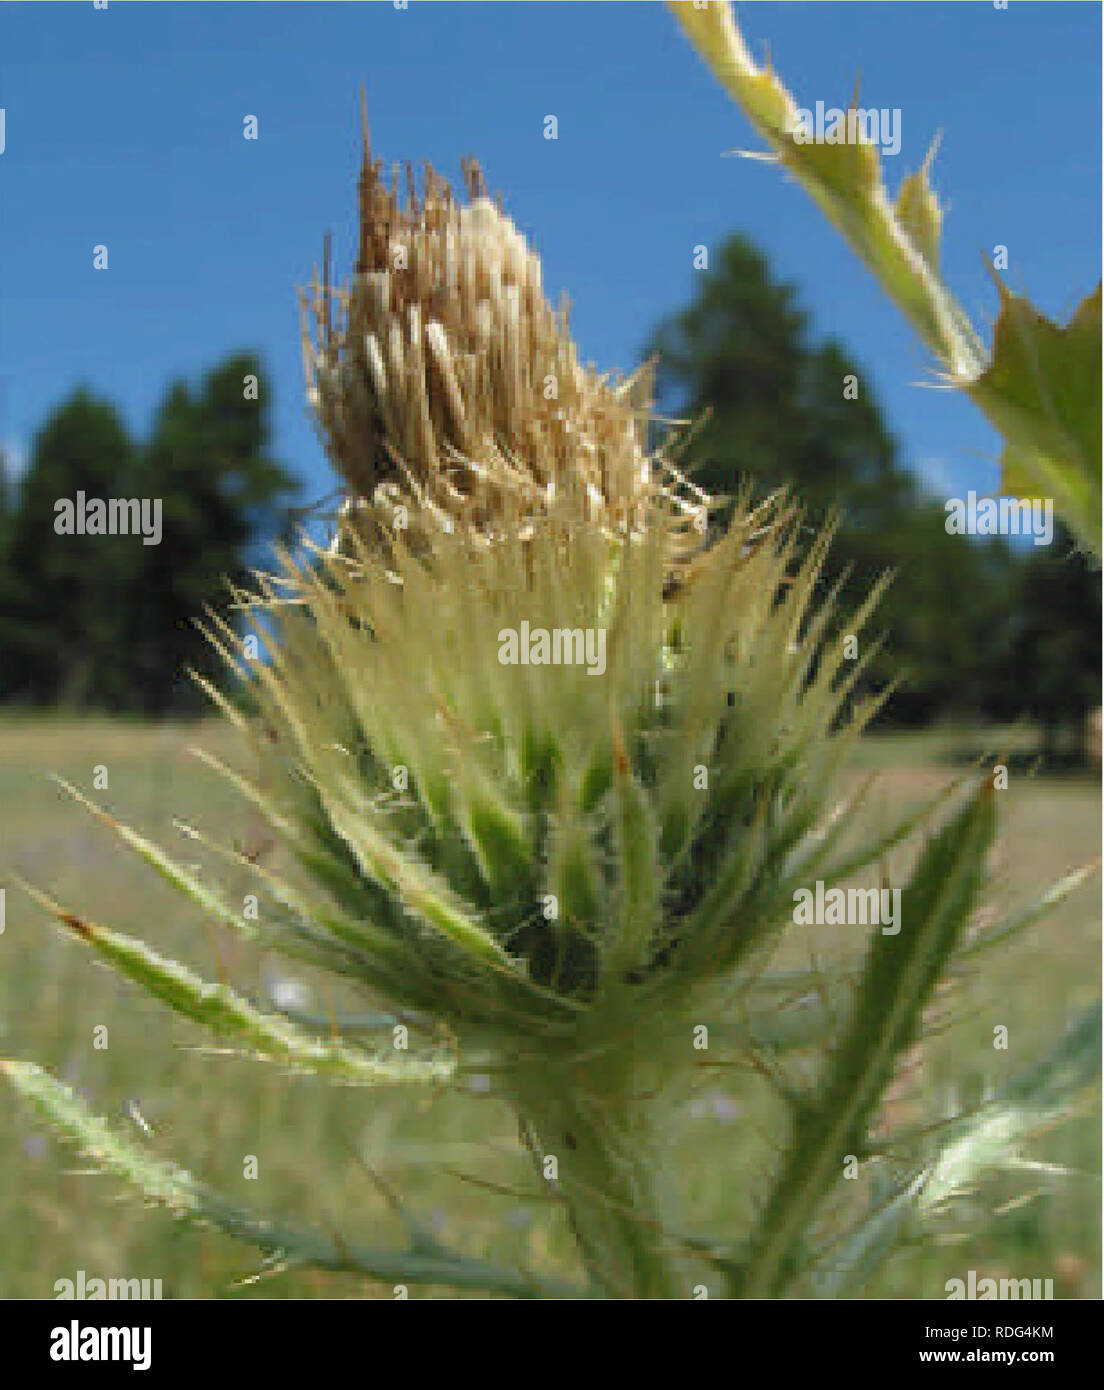 . Range-wide status assessment of cirsium longistylum (long-styled thistle) . Cirsium longistylum; Cirsium; Long-styled thistle; Endemic plants; Rare plants. Leaves linear-lanceolate, base not decurrent, length about 10 times the width, to 15 cm long, 1.5 cm wide, lobed to 1/3 width, or less, the smaller upper leaves essentially entire, lobes ovate, often irregular with numerous fine marginal spines to 5 mm long. Leaves gray-green, lightly arachnoid above, white, villous below. Flower heads 3 cm high, 2.5 cm wide. Arrangement of heads variable and not exclusively in a close terminal cluster, b Stock Photo